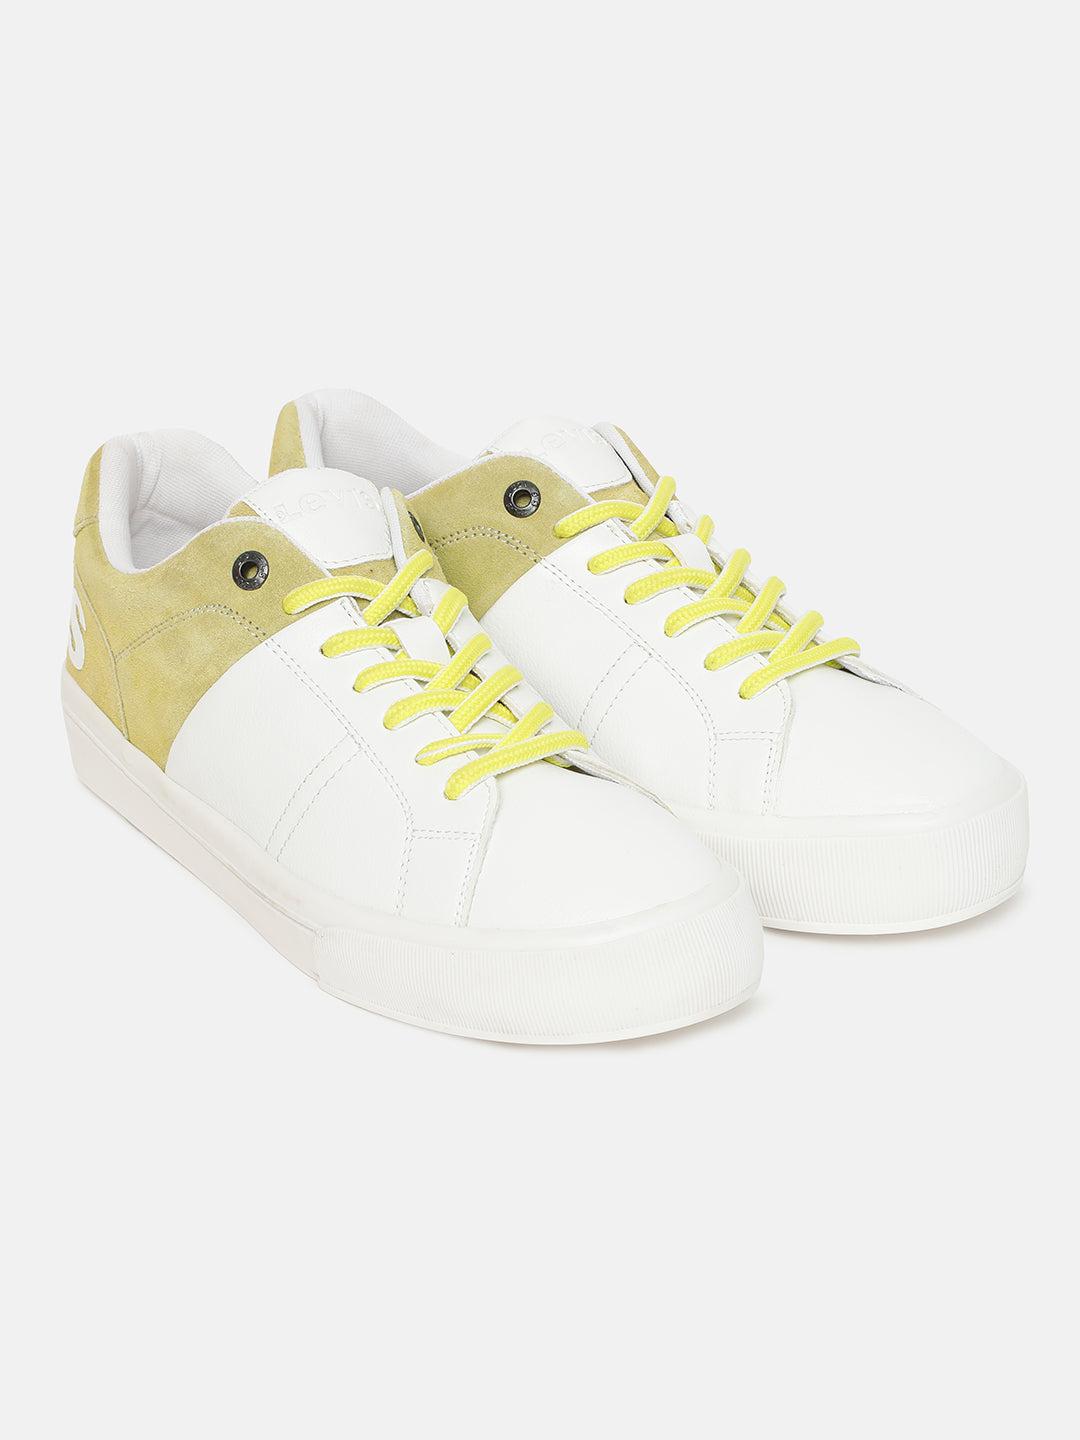 men's white and yellow colorblock sneakers